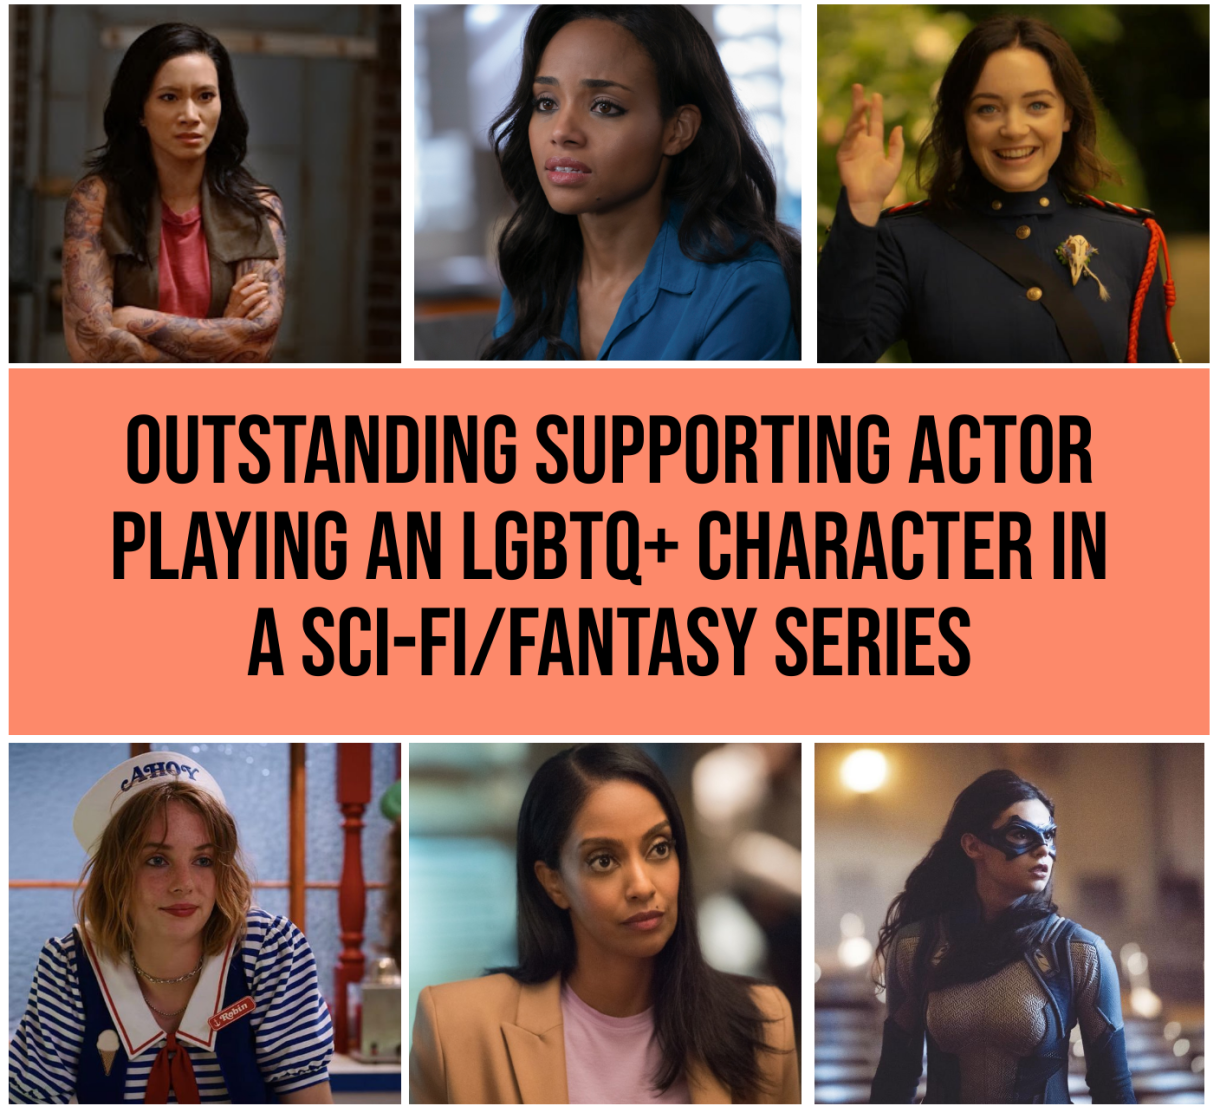 Top Row: Chantal Thuy as Grace Choi, Black Lightning (The CW) // Megan Tandy as Sophie Moore, Batwoman (The CW) // Amalia Holm as Scylla Ramshorn, Motherland: Fort Salem (Freeform) 
Bottom Row: Maya Hawke as Robin Buckley, Stranger Things (Netflix)  // Azie Tesfai as Kelly Olsen, Supergirl (The CW) // Nicole Maines as Nia Nal, Supergirl (The CW